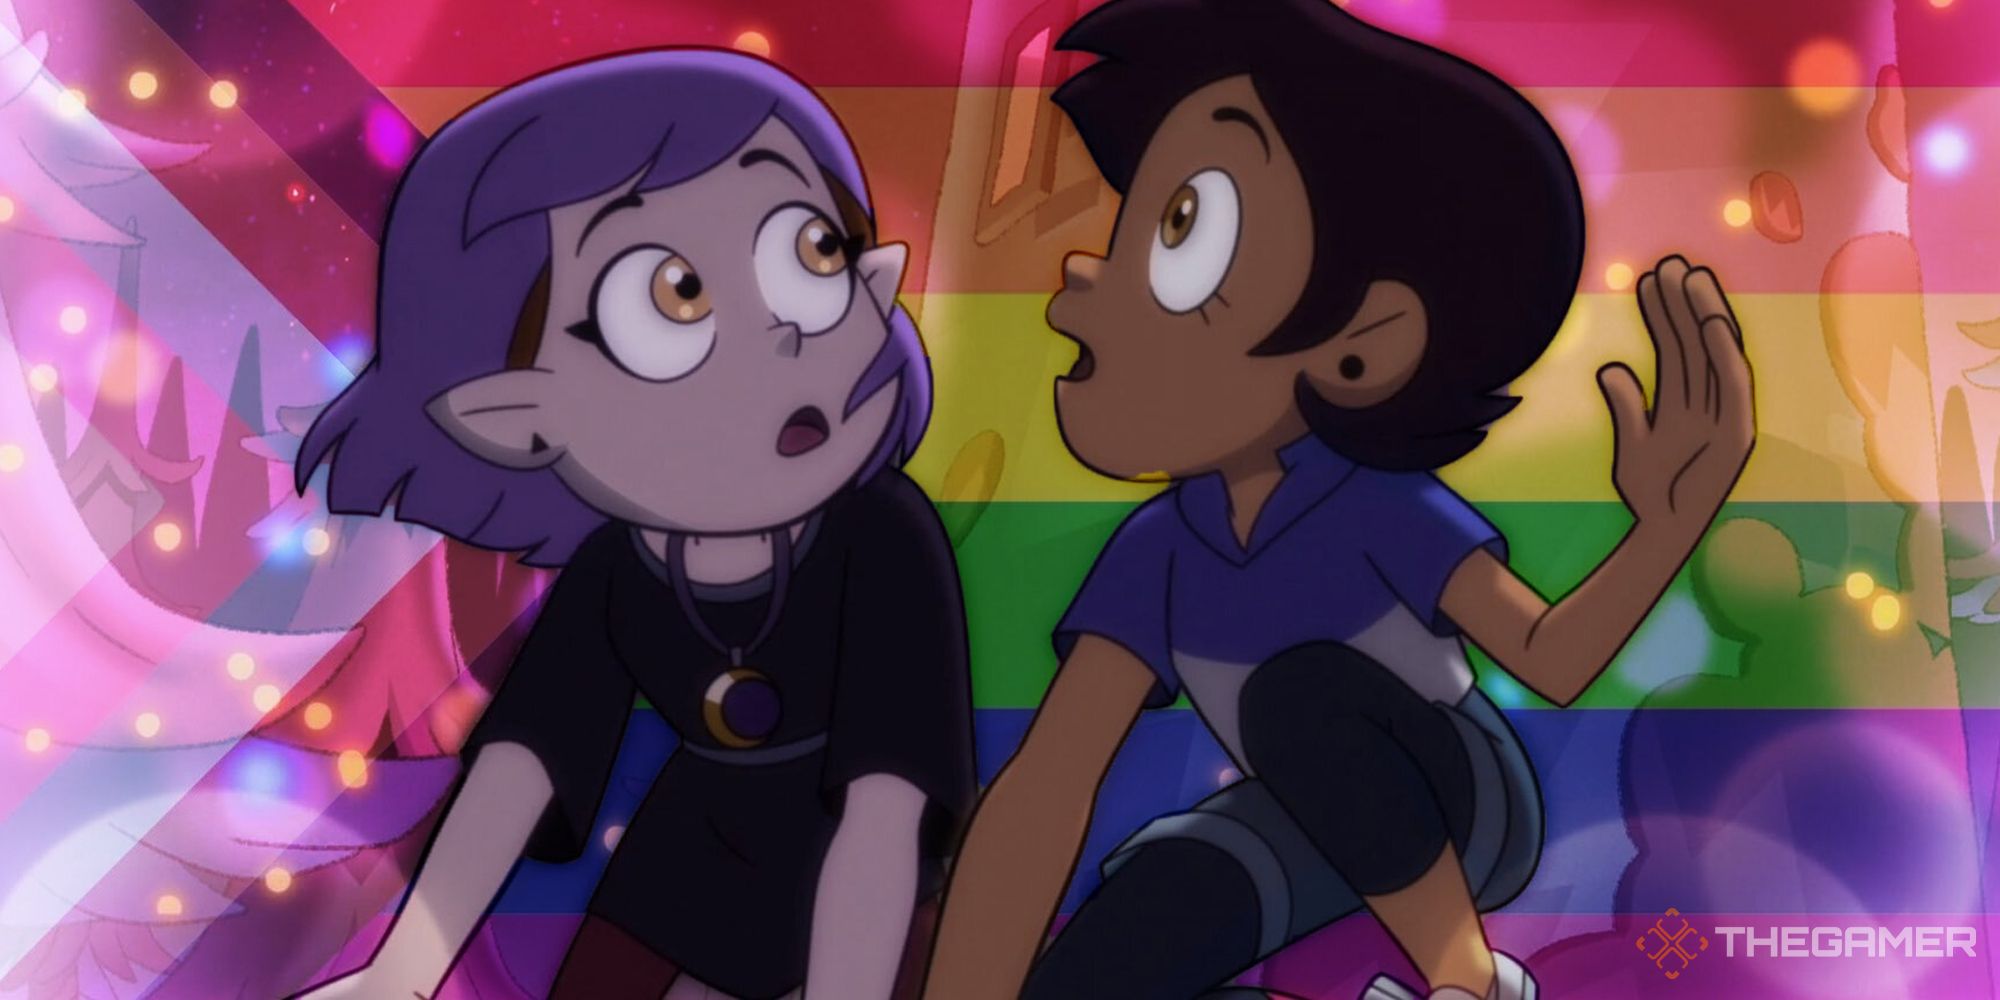 The Owl House's Luz & Amity Just Had Their Gayest Episode Yet